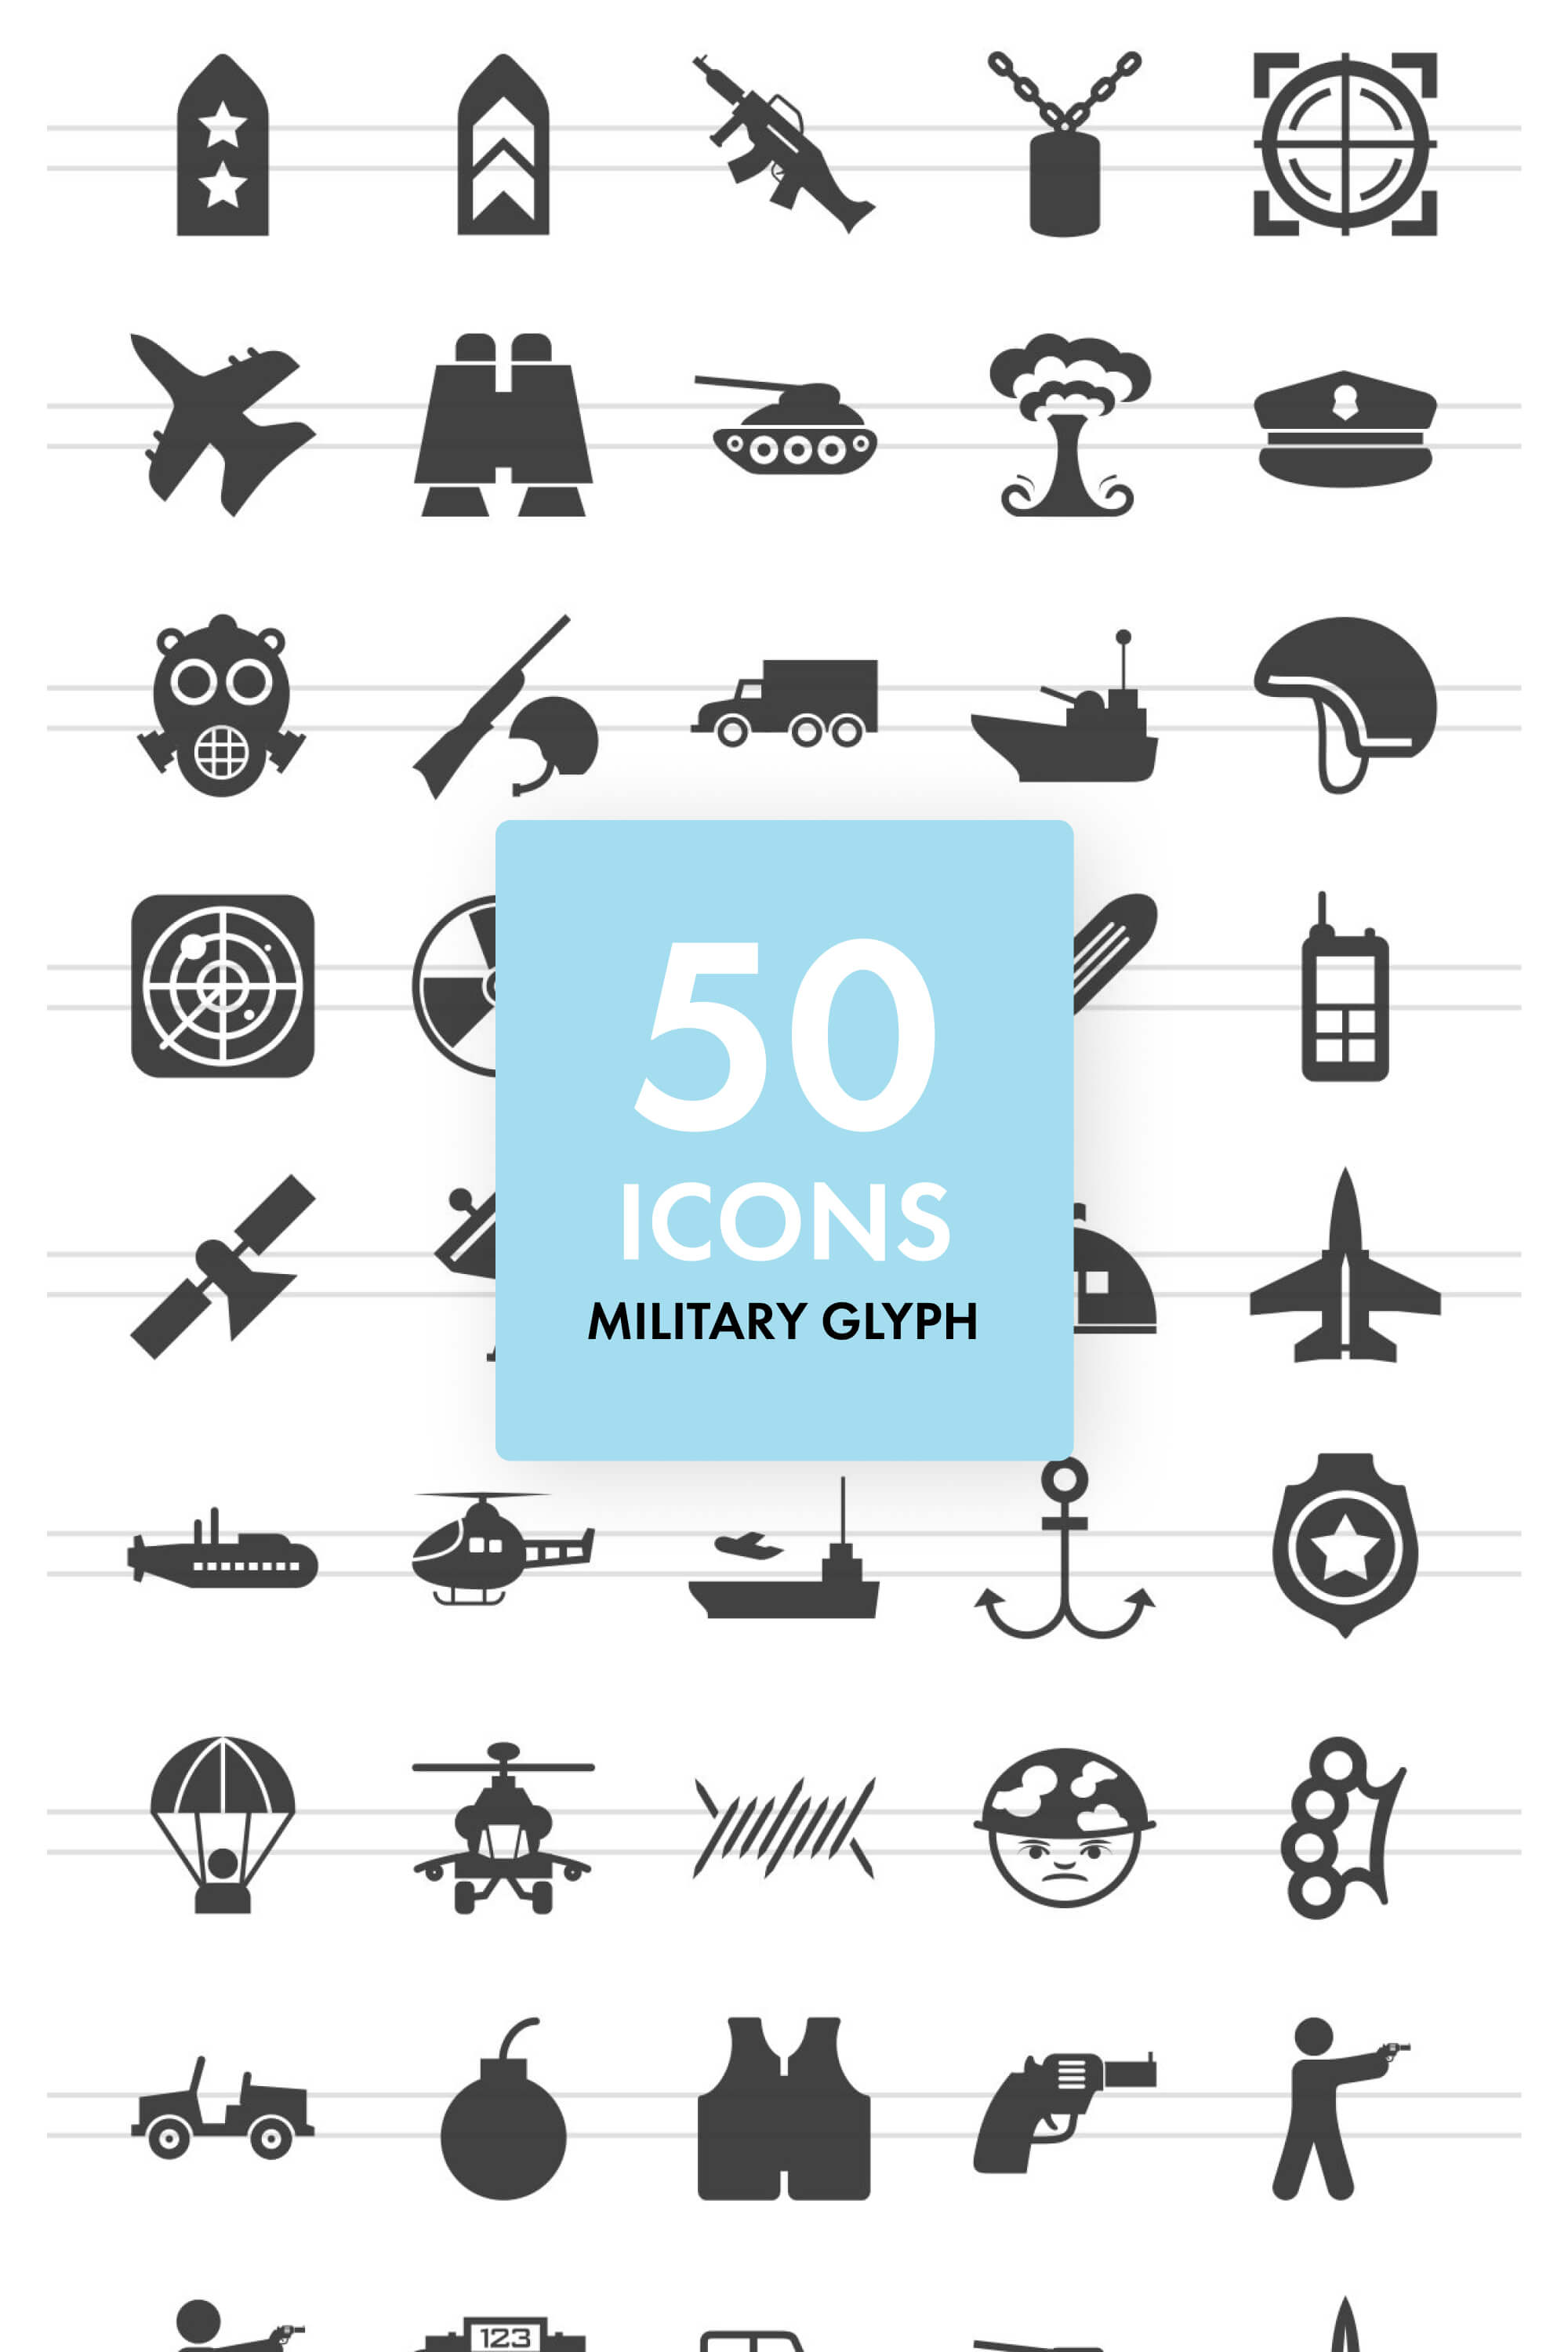 Icons of targets, planes, anchors, etc.